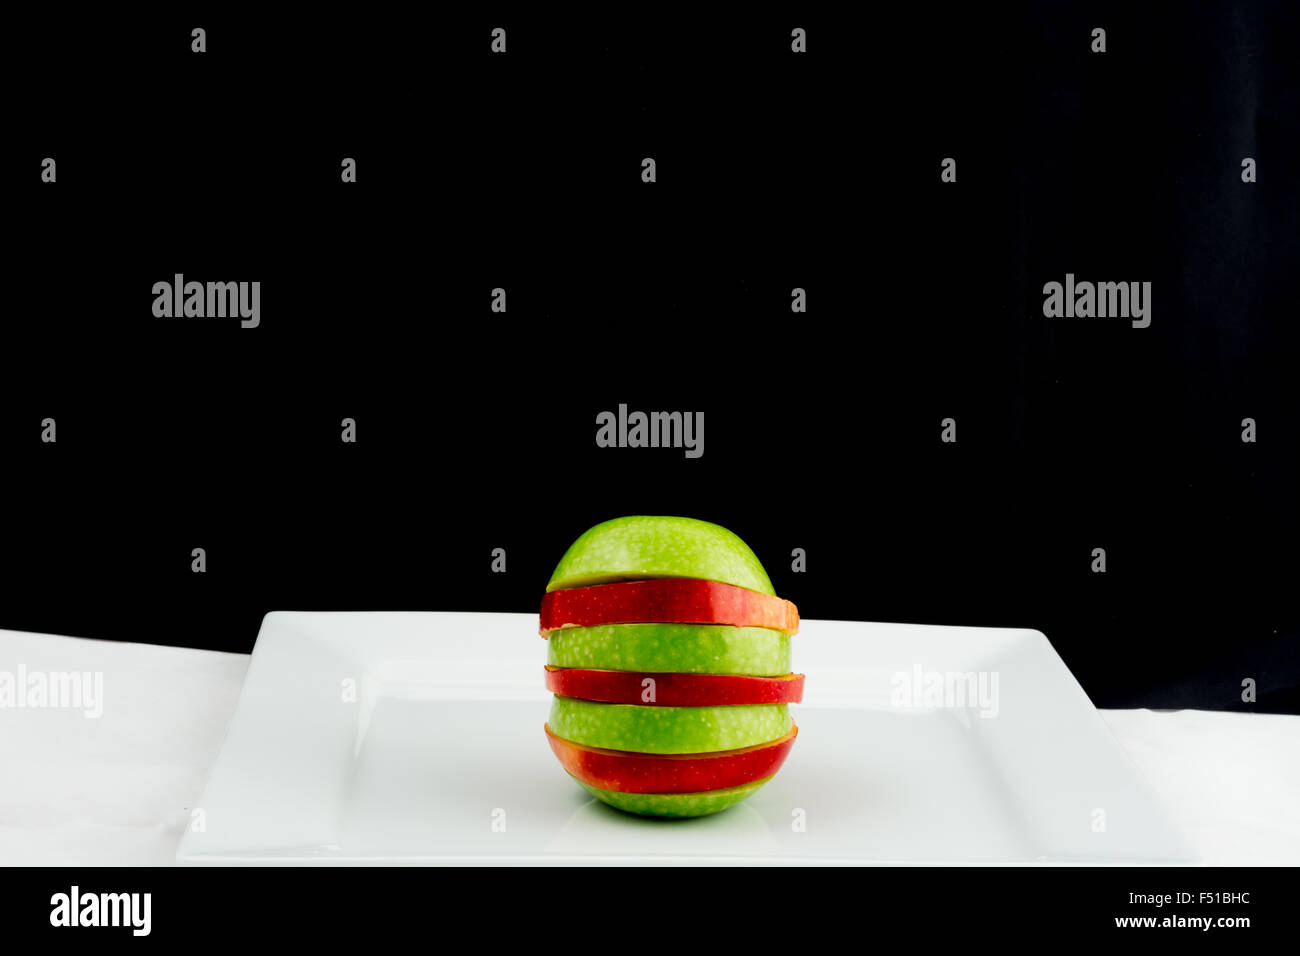 Red and green apple cut into slices Stock Photo